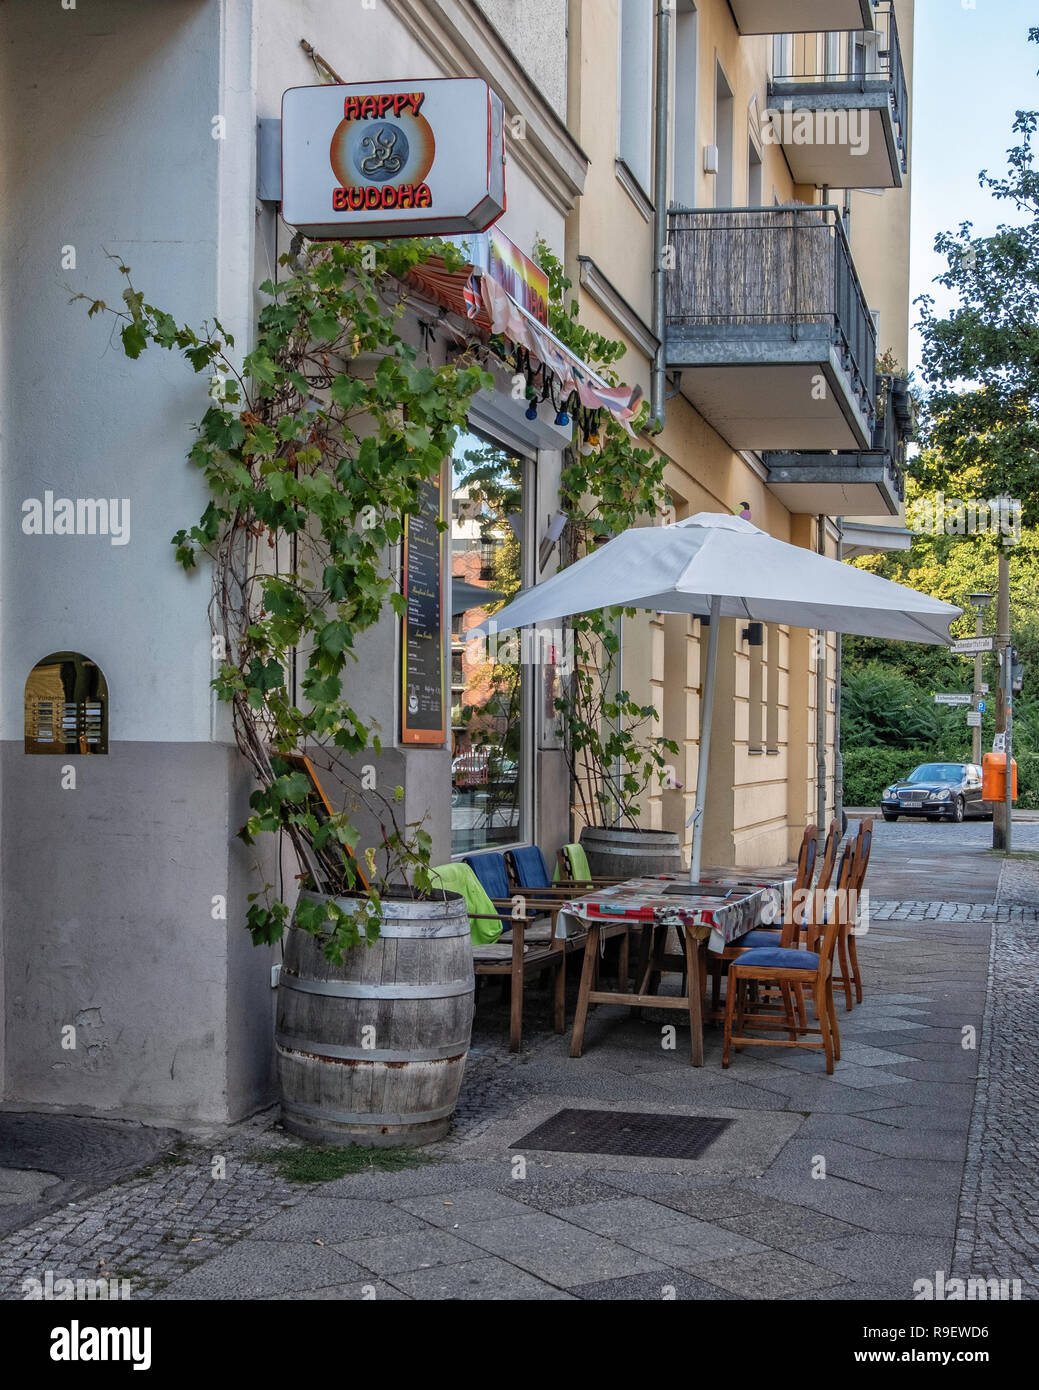 Berlin-Mitte. happy Buddha Indian restaurant with outdoor tables & extra seating on a parked truck Stock Photo